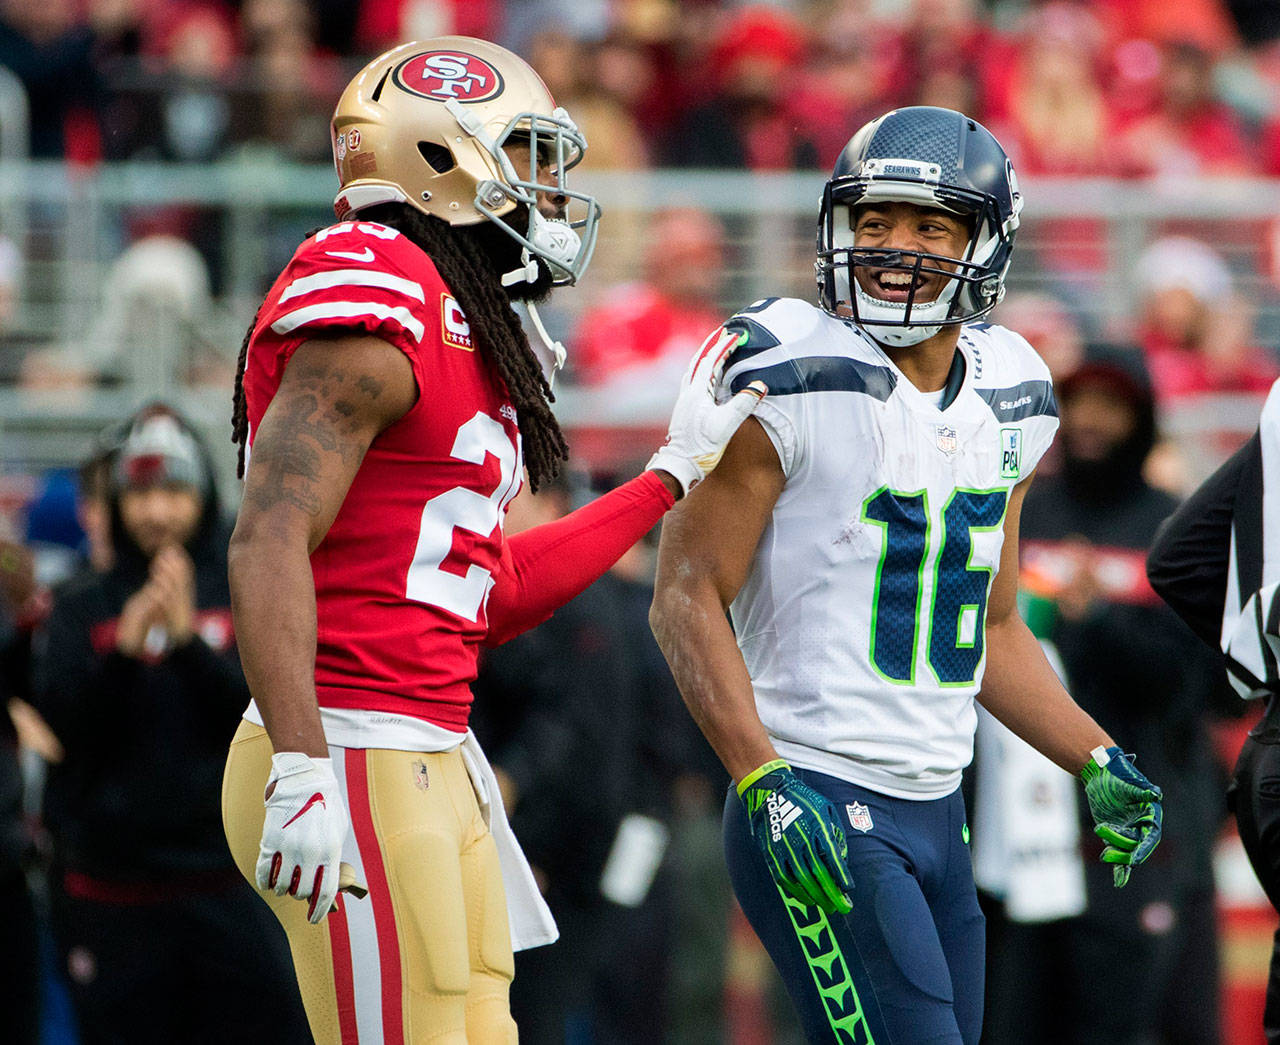 San Francisco 49ers cornerback Richard Sherman (25) and Seattle Seahawks wide receiver Tyler Lockett (16) share a moment on the field during first quarter action on Sunday, Dec. 16, 2018 at Levi’s Stadium in Santa Clara, Calif. (Mike Siegel/Seattle Times/TNS)